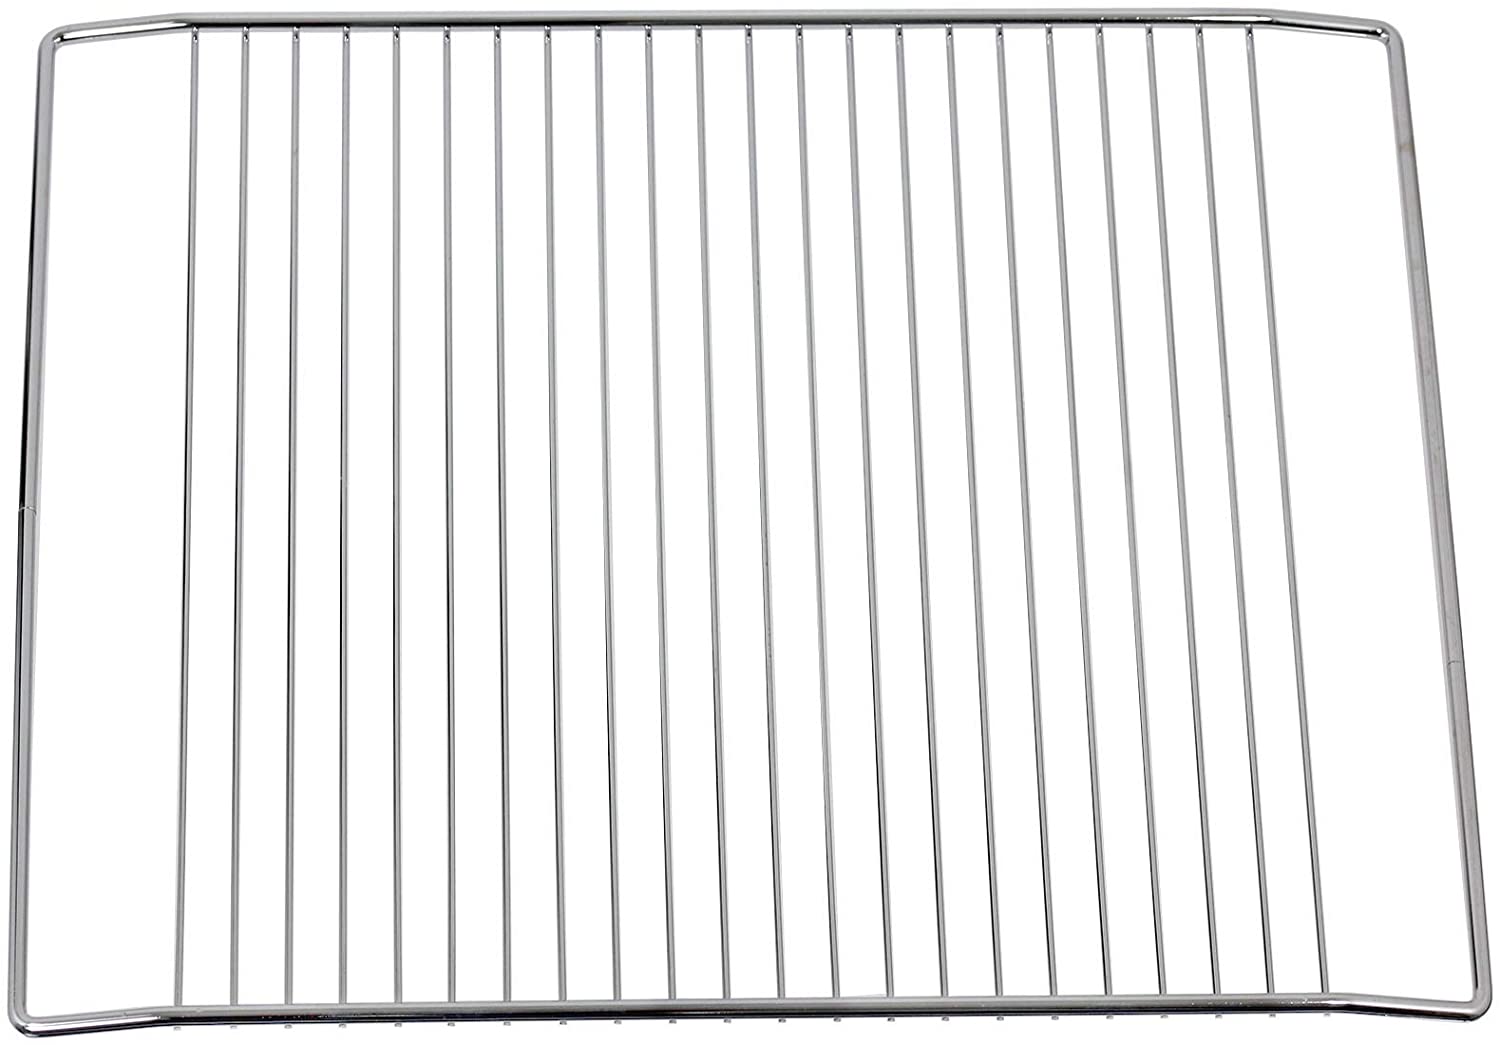 Wire Shelf Rack for Blomberg Oven Cooker Grill 463 x 360 mm